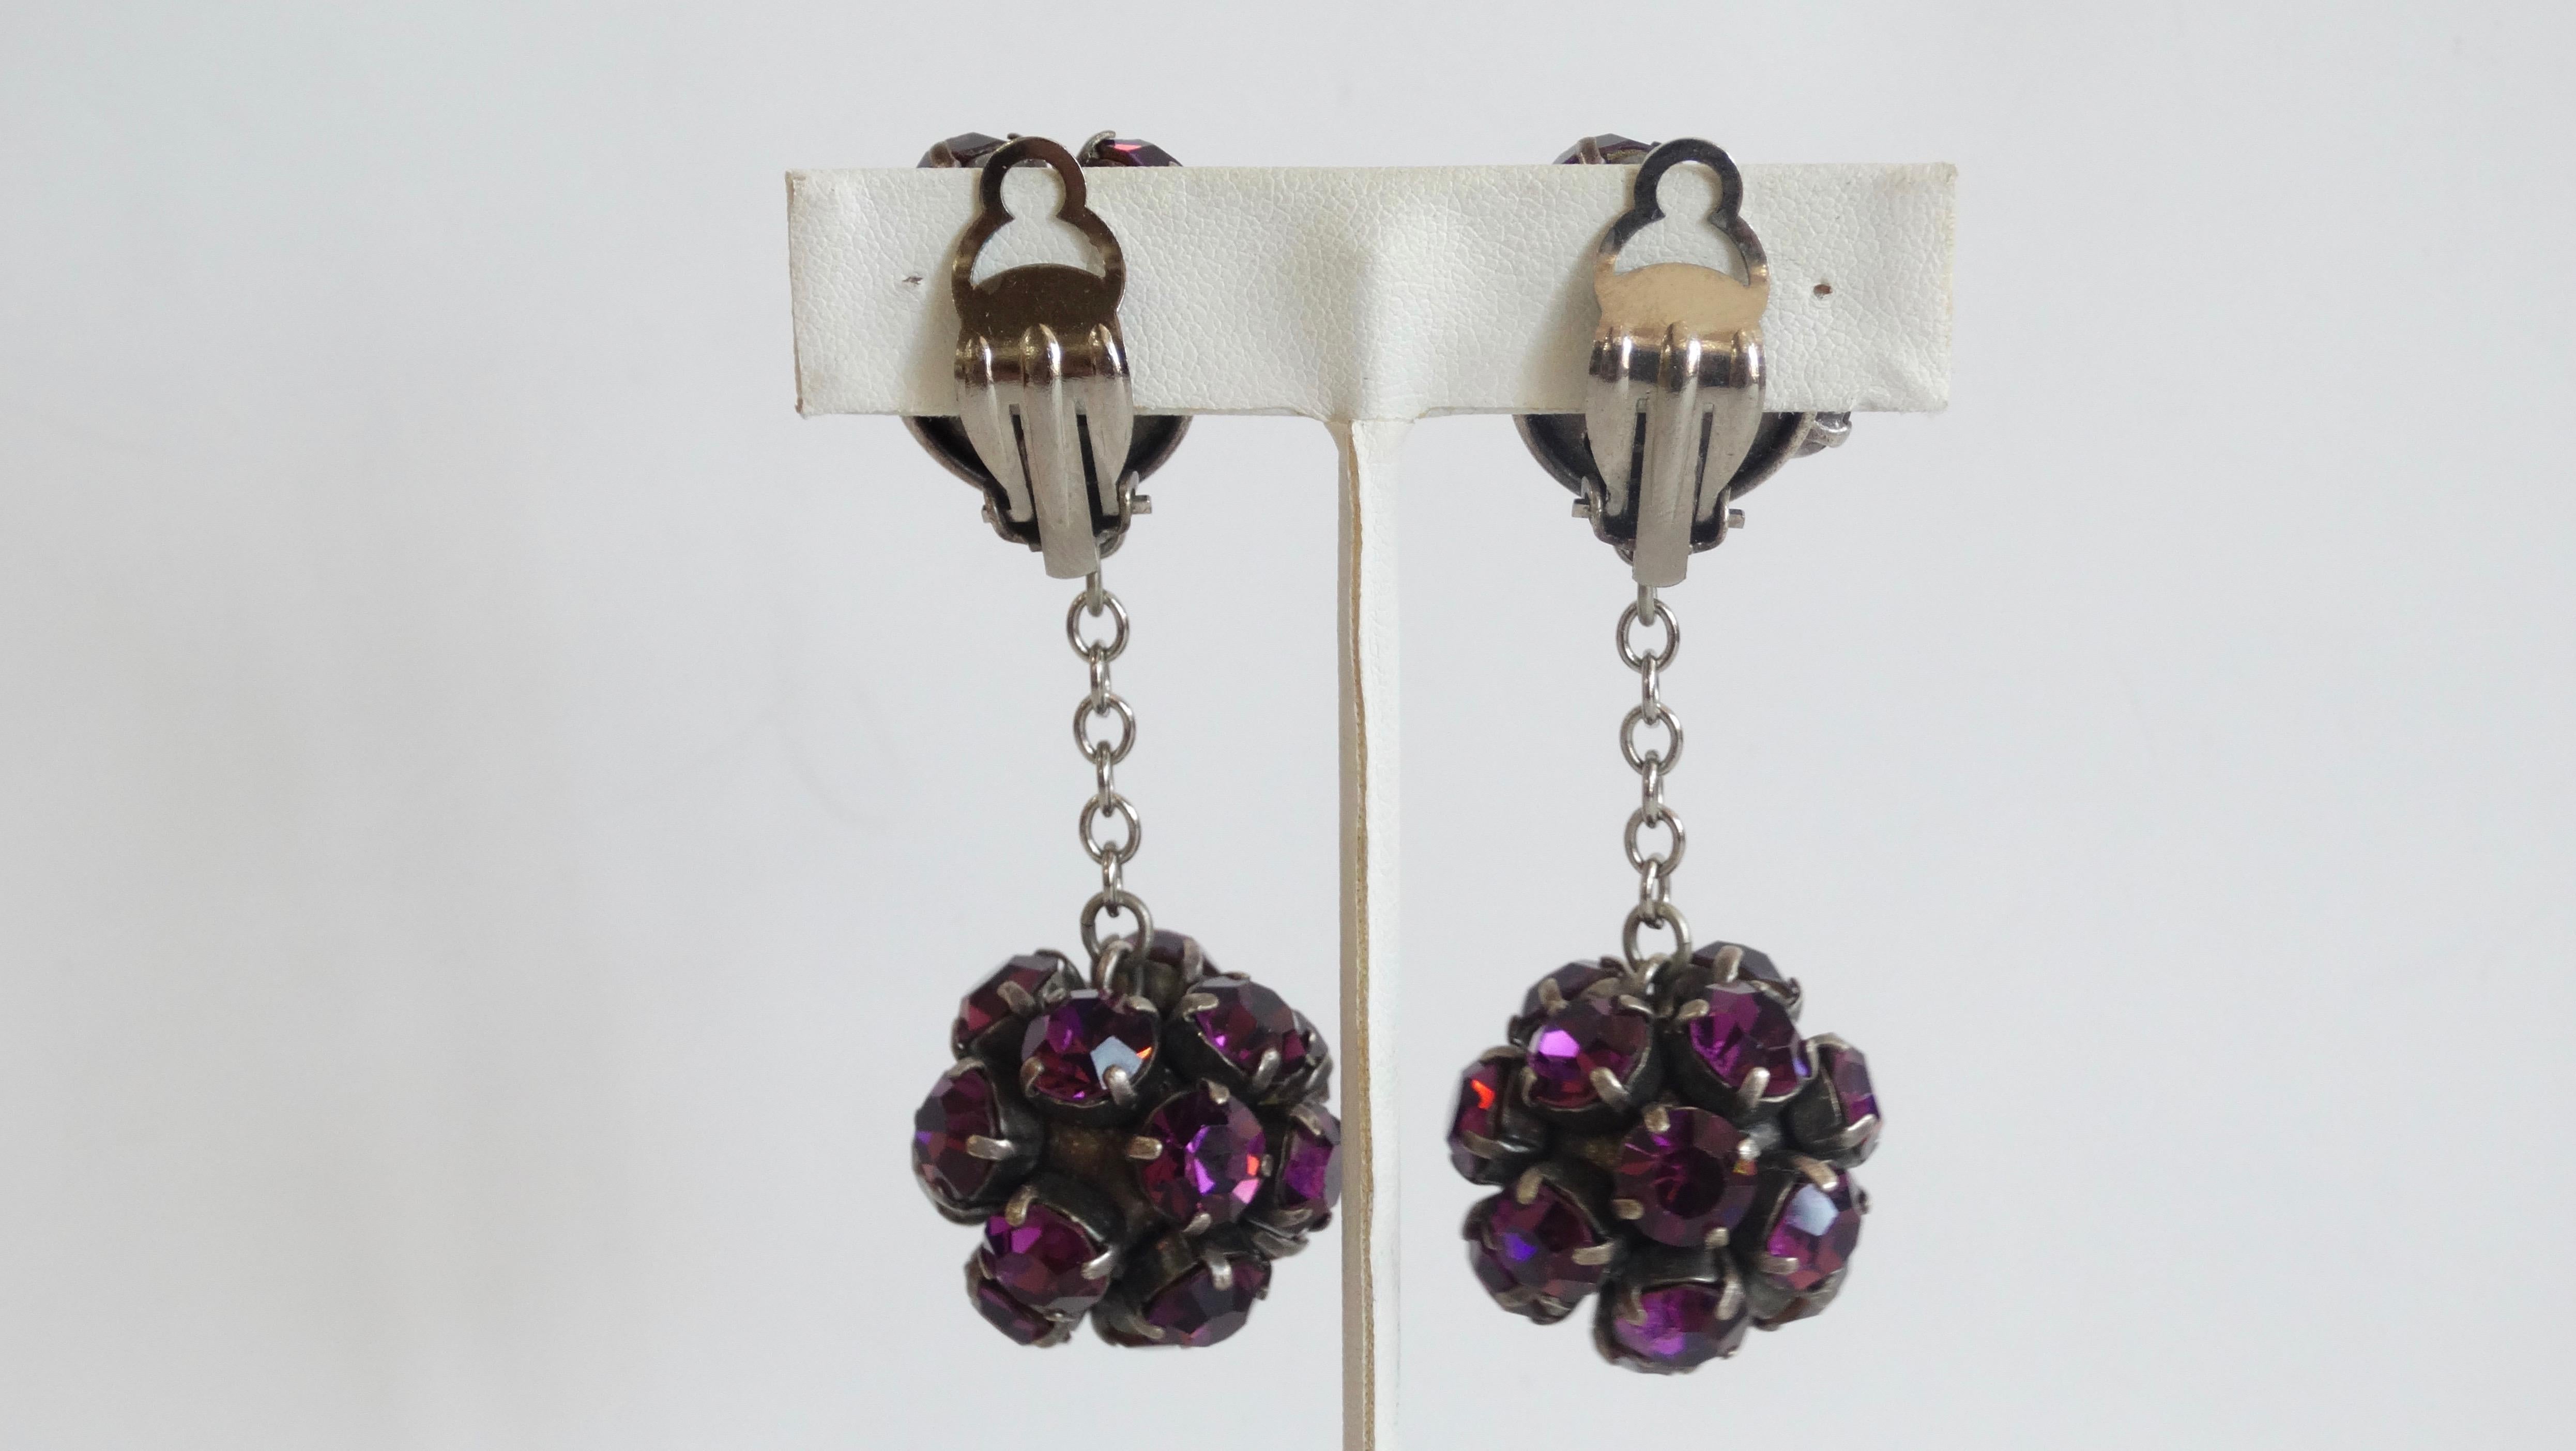 Spice up your earrings collection with these Alan Anderson earrings! Circa 1990s, these art deco inspired ball drop earrings are embellished with purple vintage rhinestones and is finished in a gun metal grey, referred to as a “Japanned” finish.